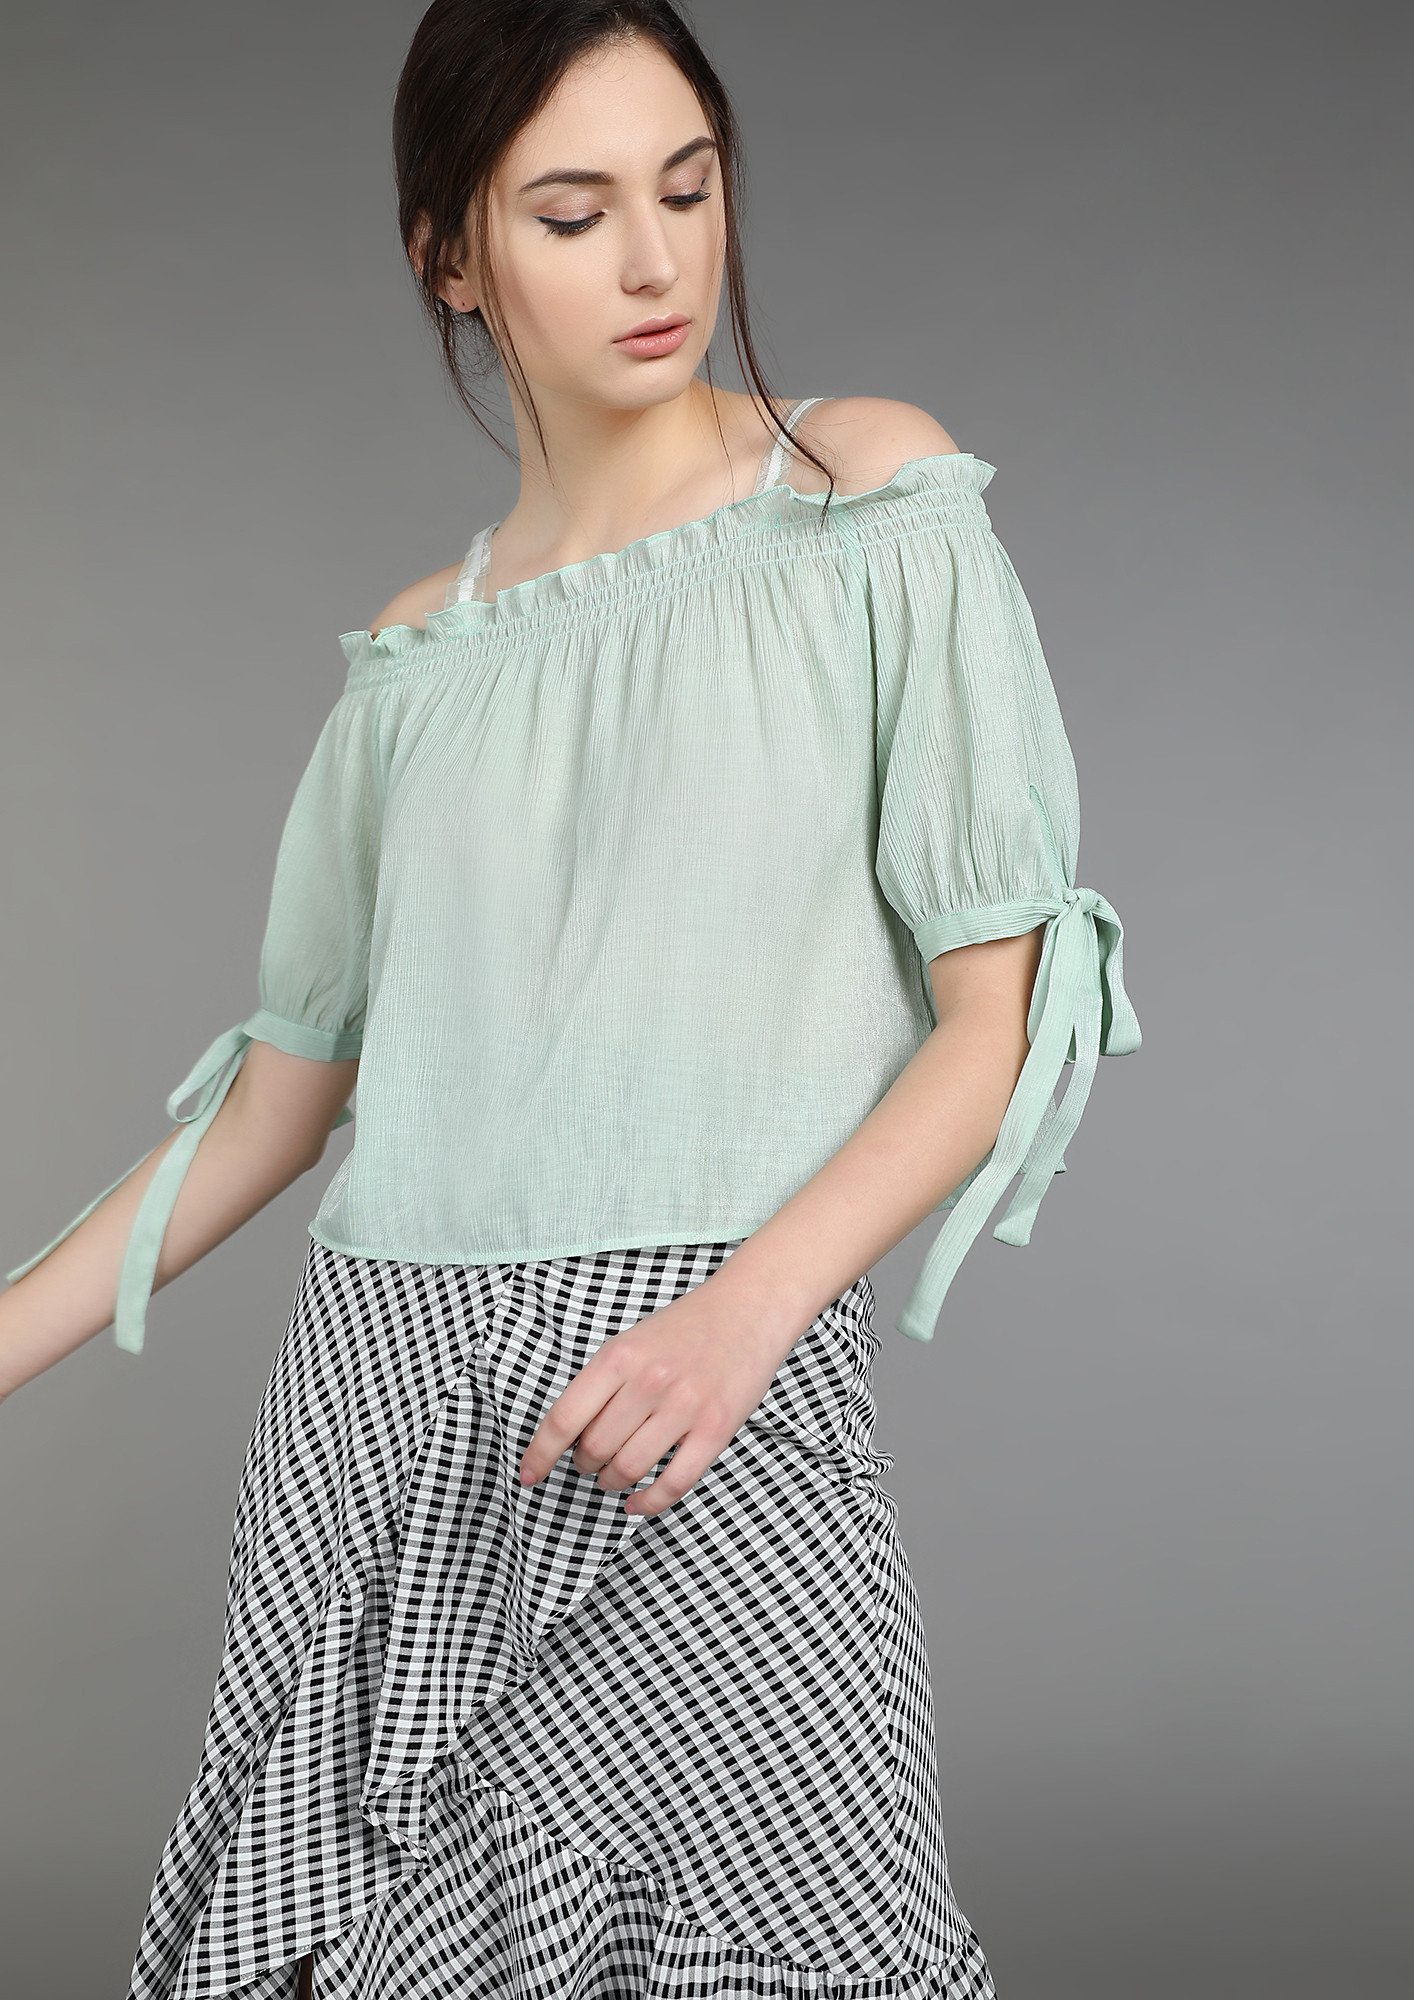 WHAT'S YOUR FAVORITE EXCUSE PASTEL GREEN BLOUSE